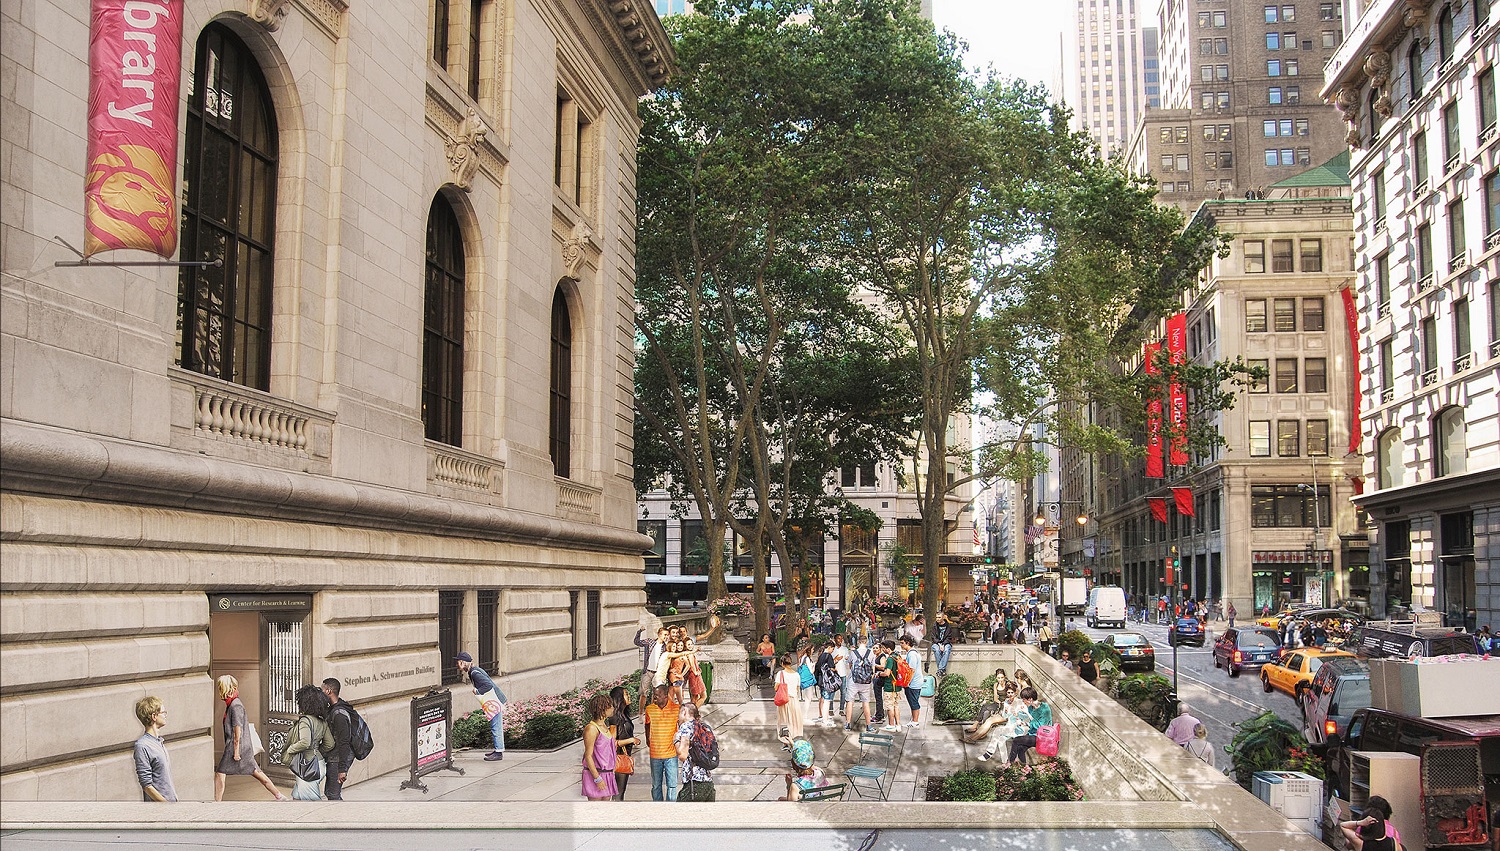 Rendering of the main branch of the New York Public Library exterior with a protected plaza